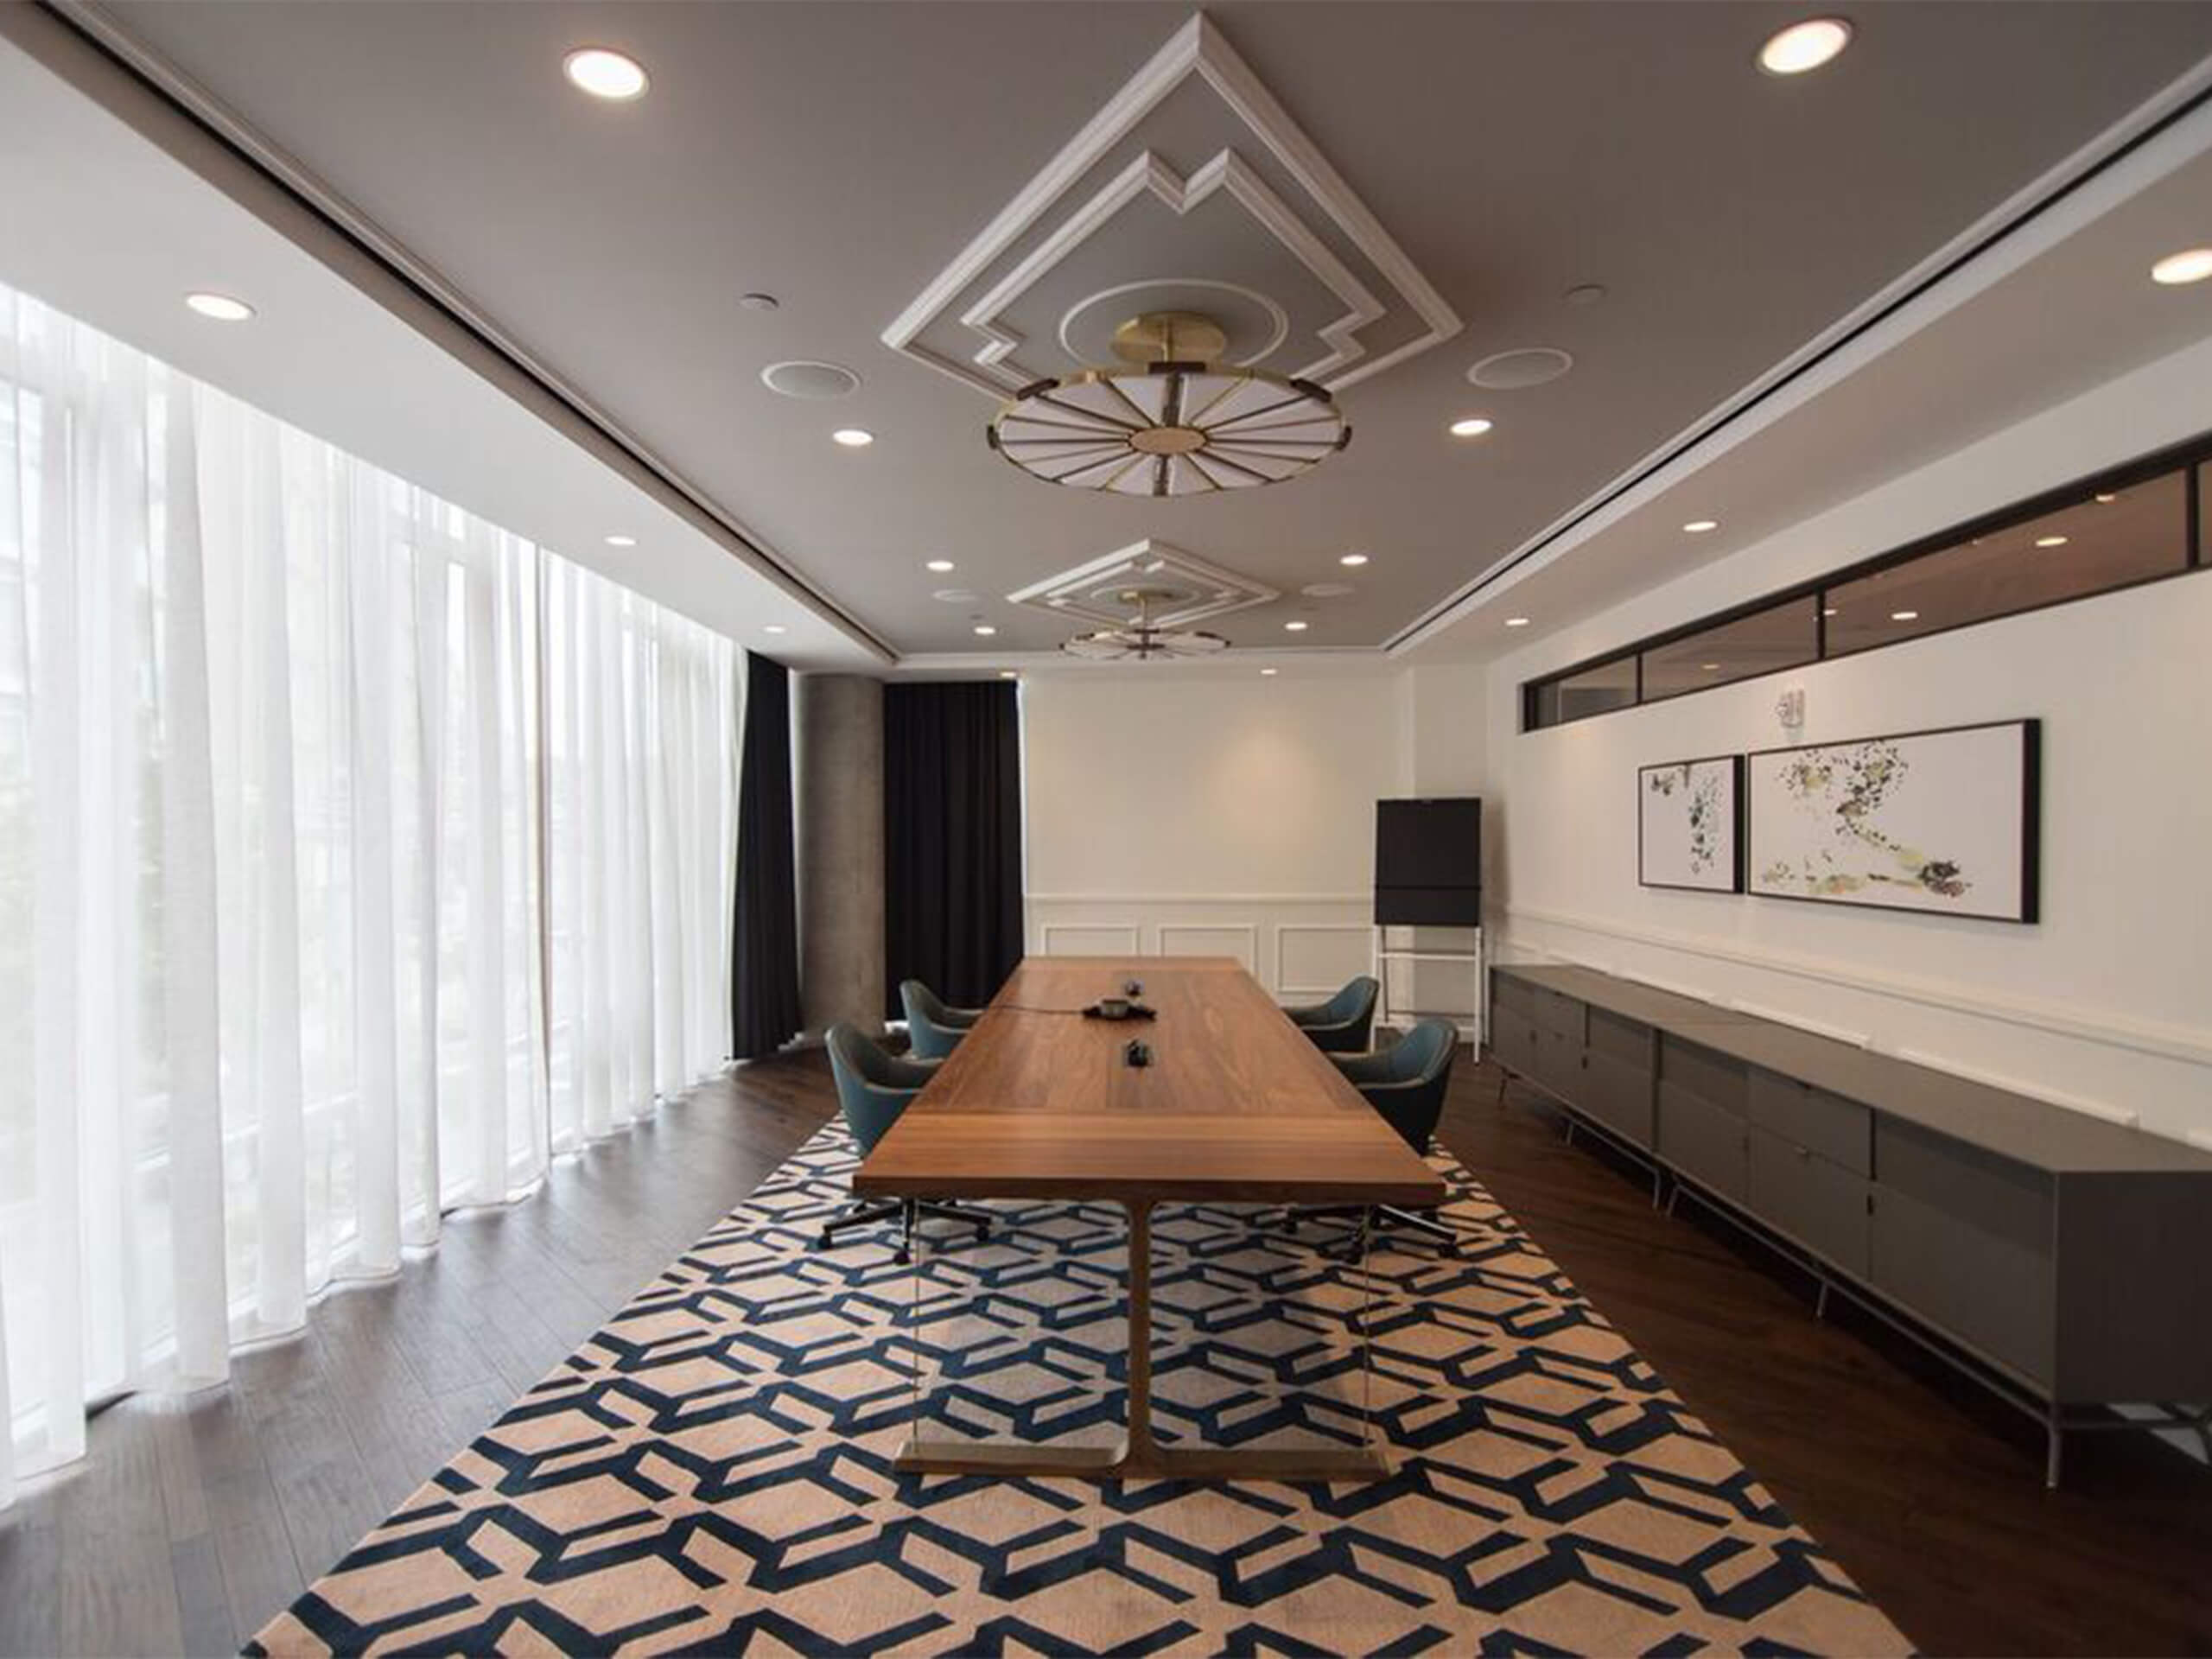 thompson hotel- conference room enterprise solutions